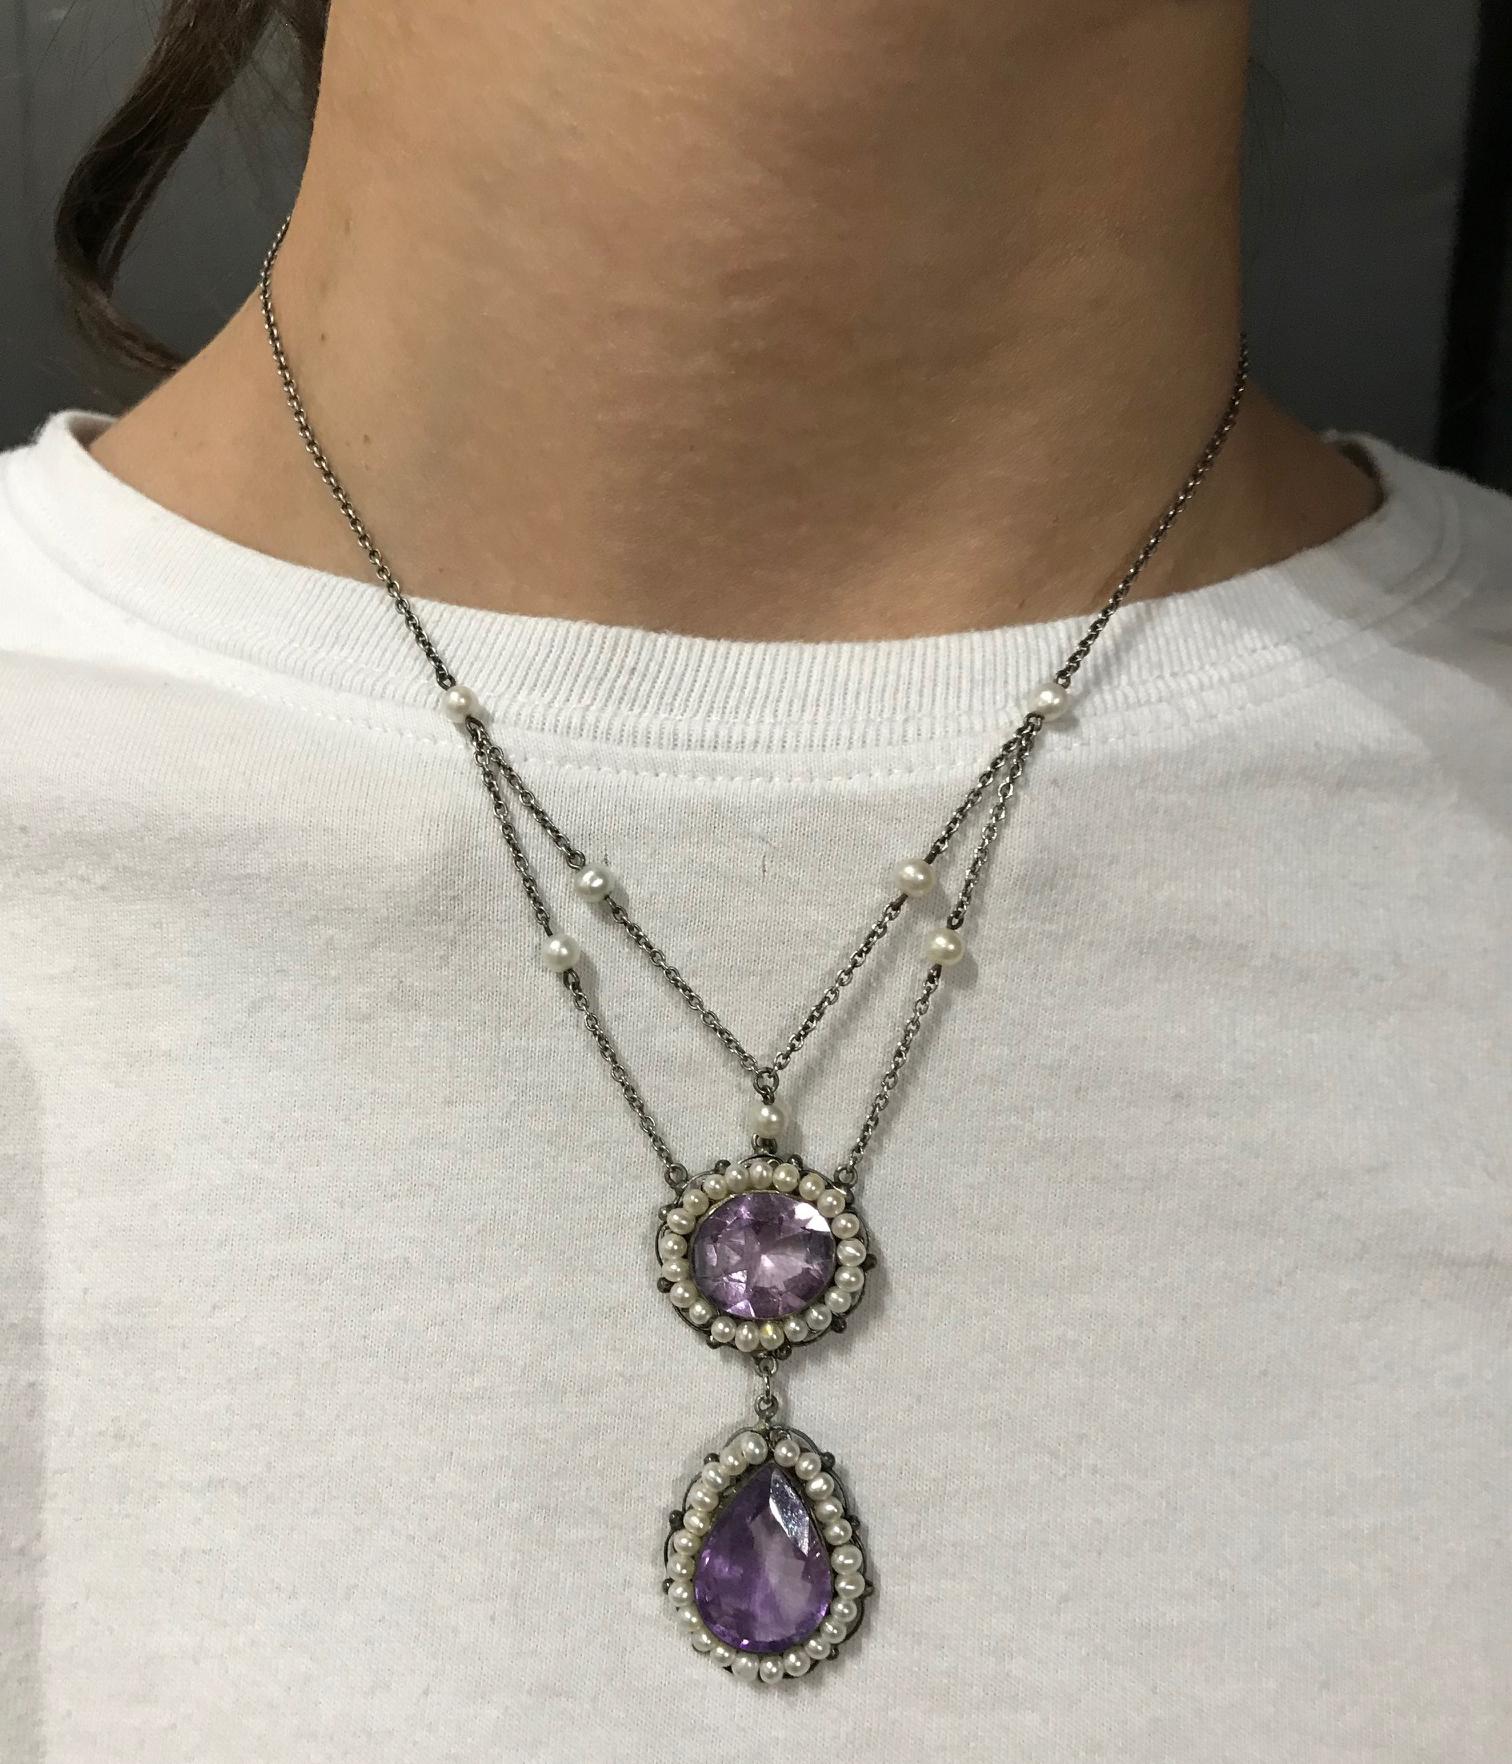 Beautiful Edwardian Amethyst and Pearl ‘Y’ Necklace, featuring Teardrop and Oval faceted purple Amethyst Gemstones,  surrounded by pearls and 2 graduated loops accented with pearls to highlight the collar bone. Hand crafted in Sterling Silver, the